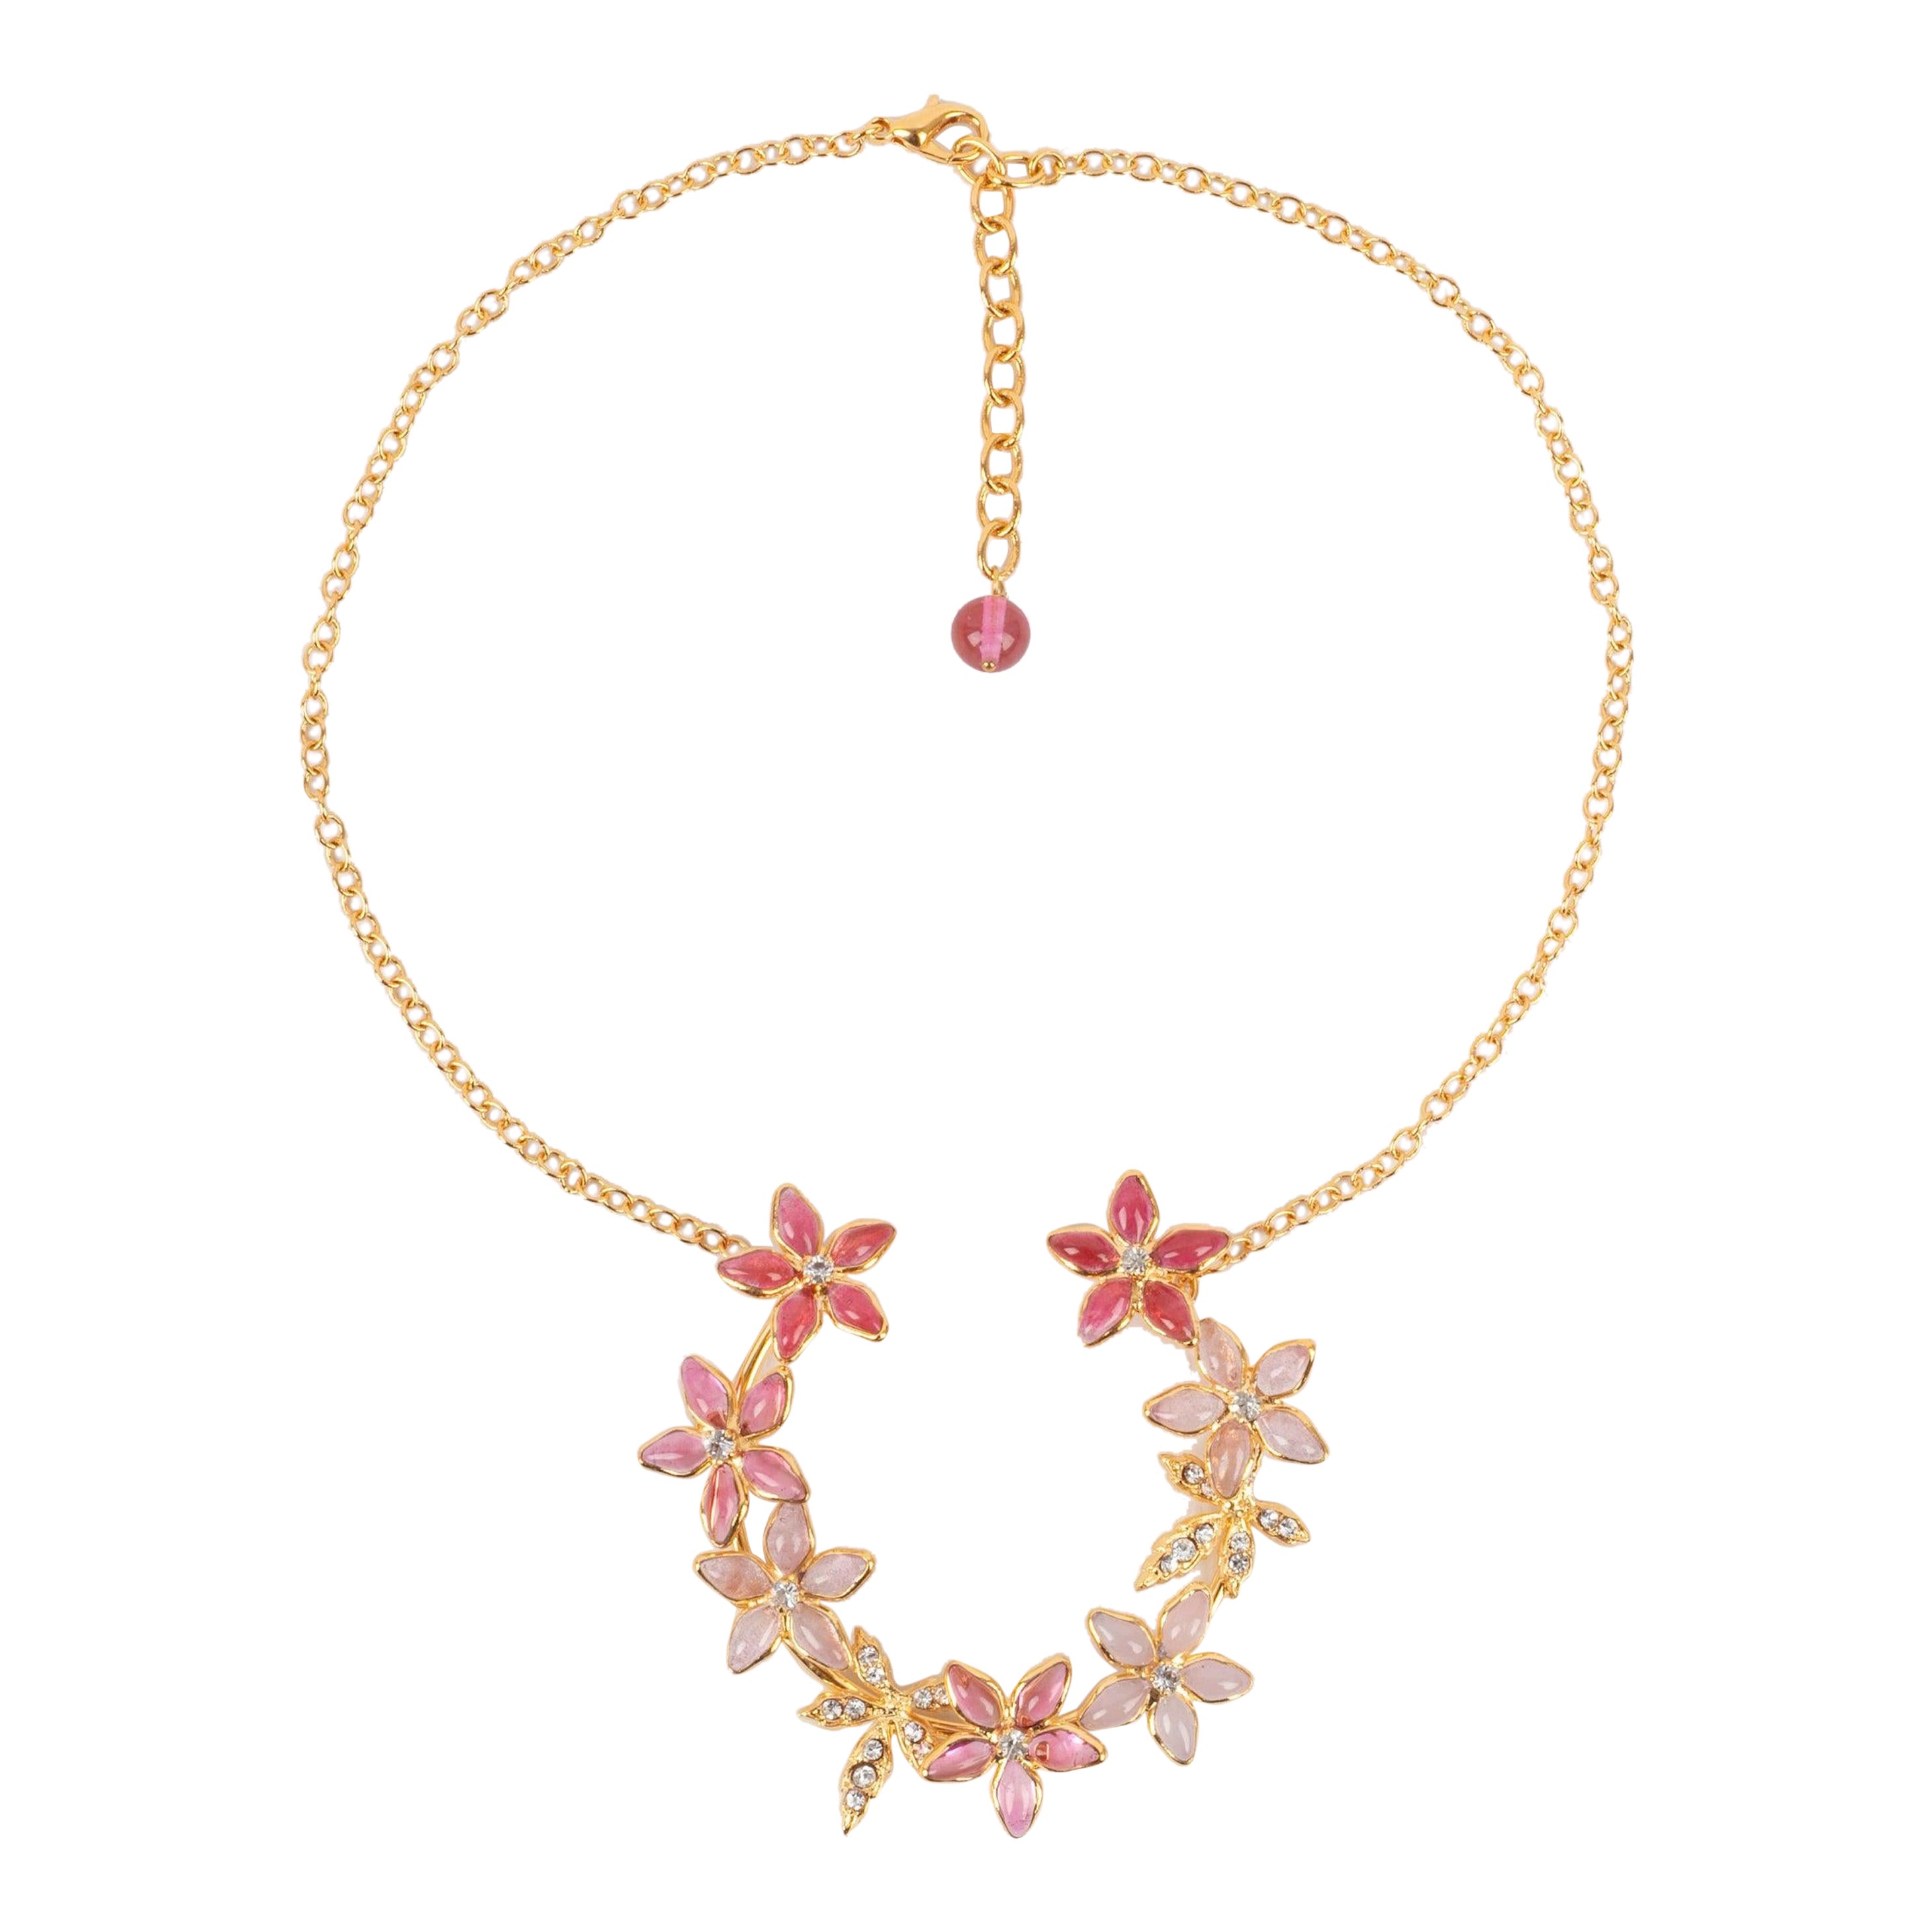 Augustine Golden Metal Necklace with Rhinestones and Glass Paste in Pink Tones For Sale